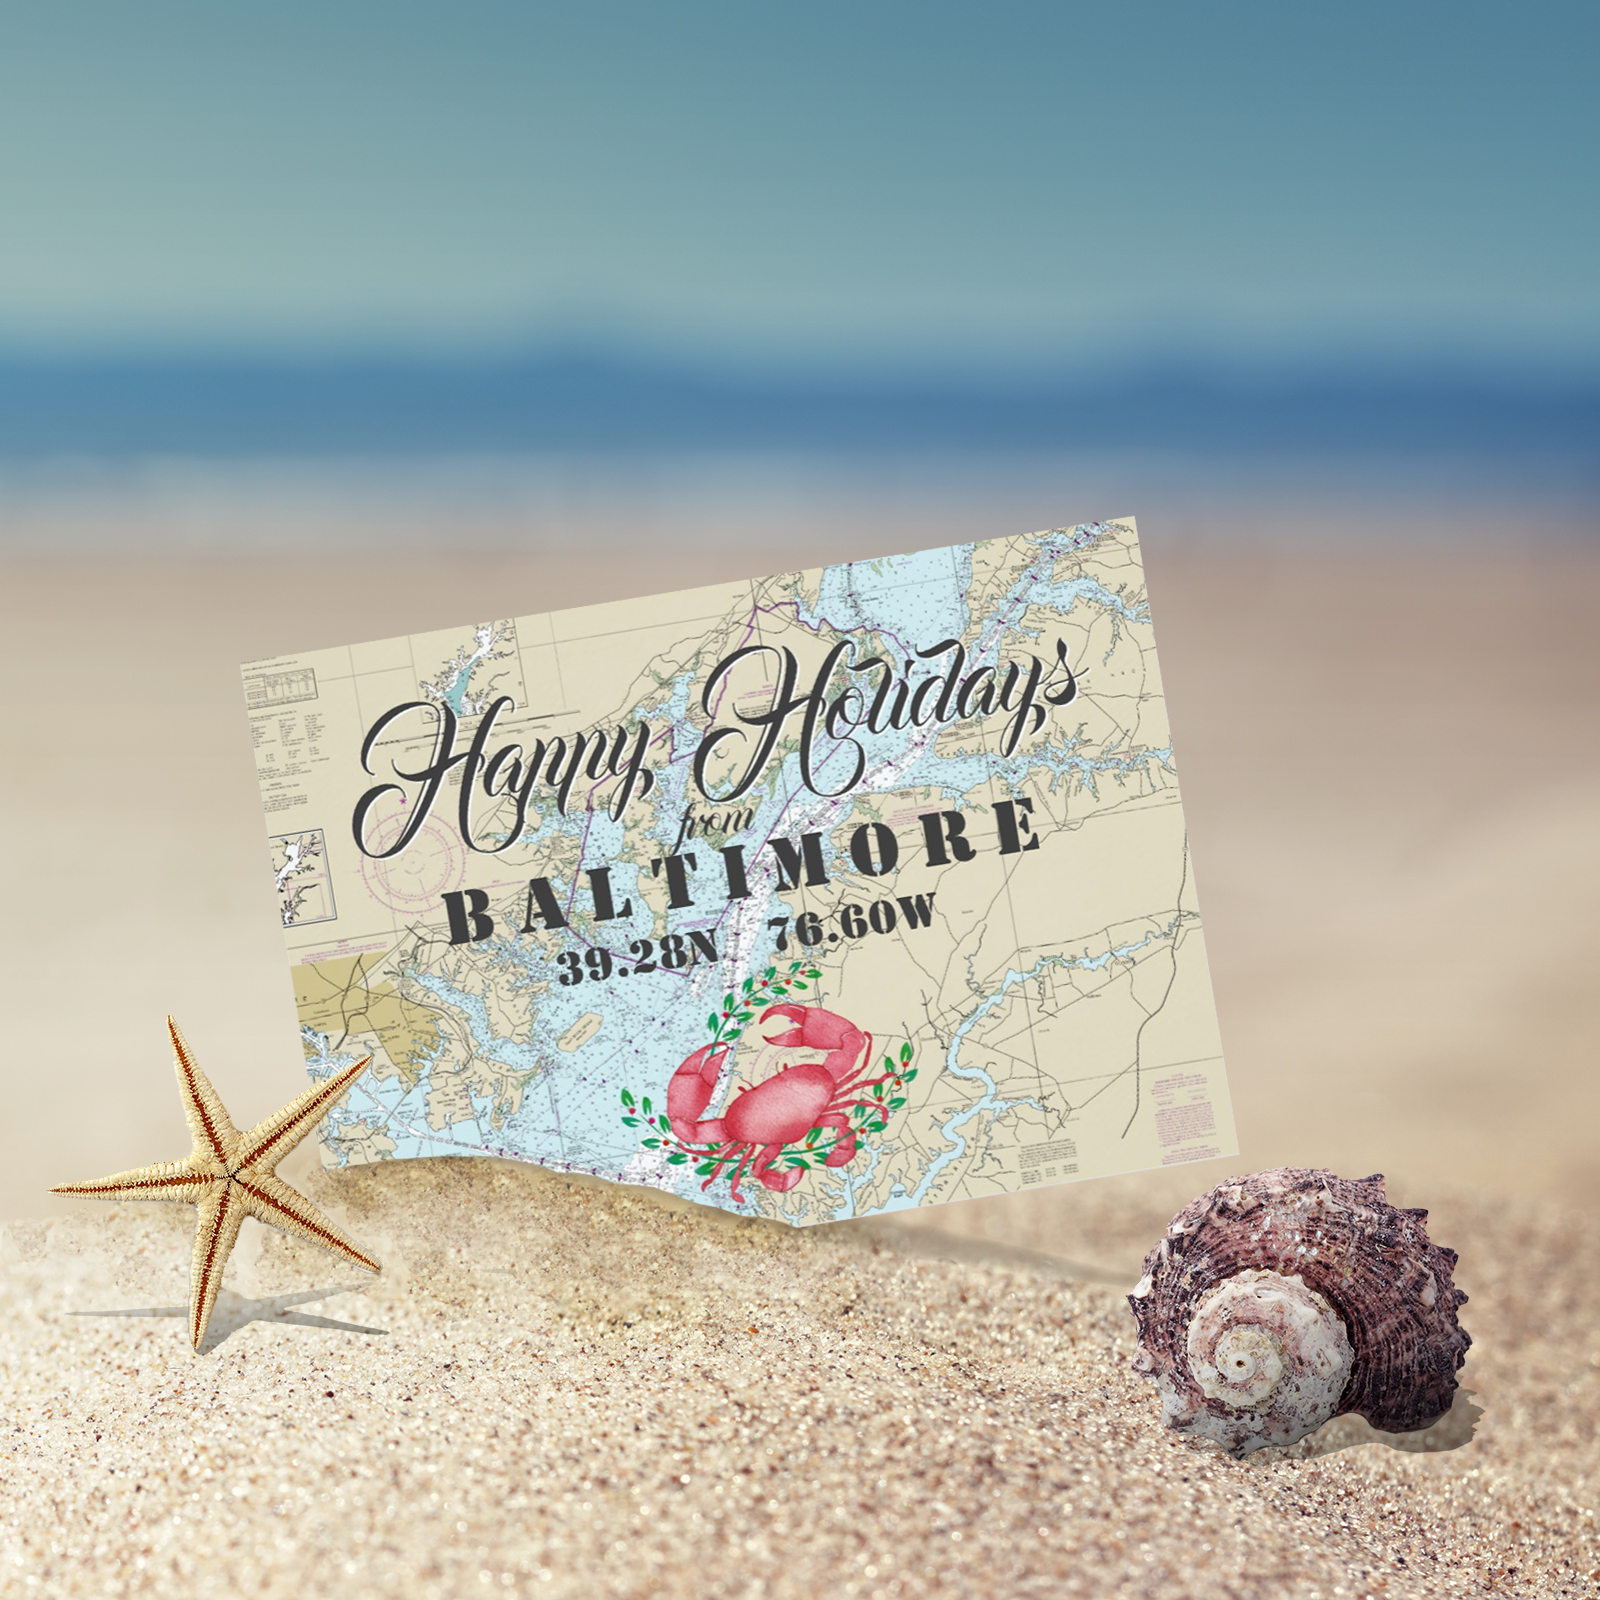 Nautical Happy Holidays from Baltimore Card Design